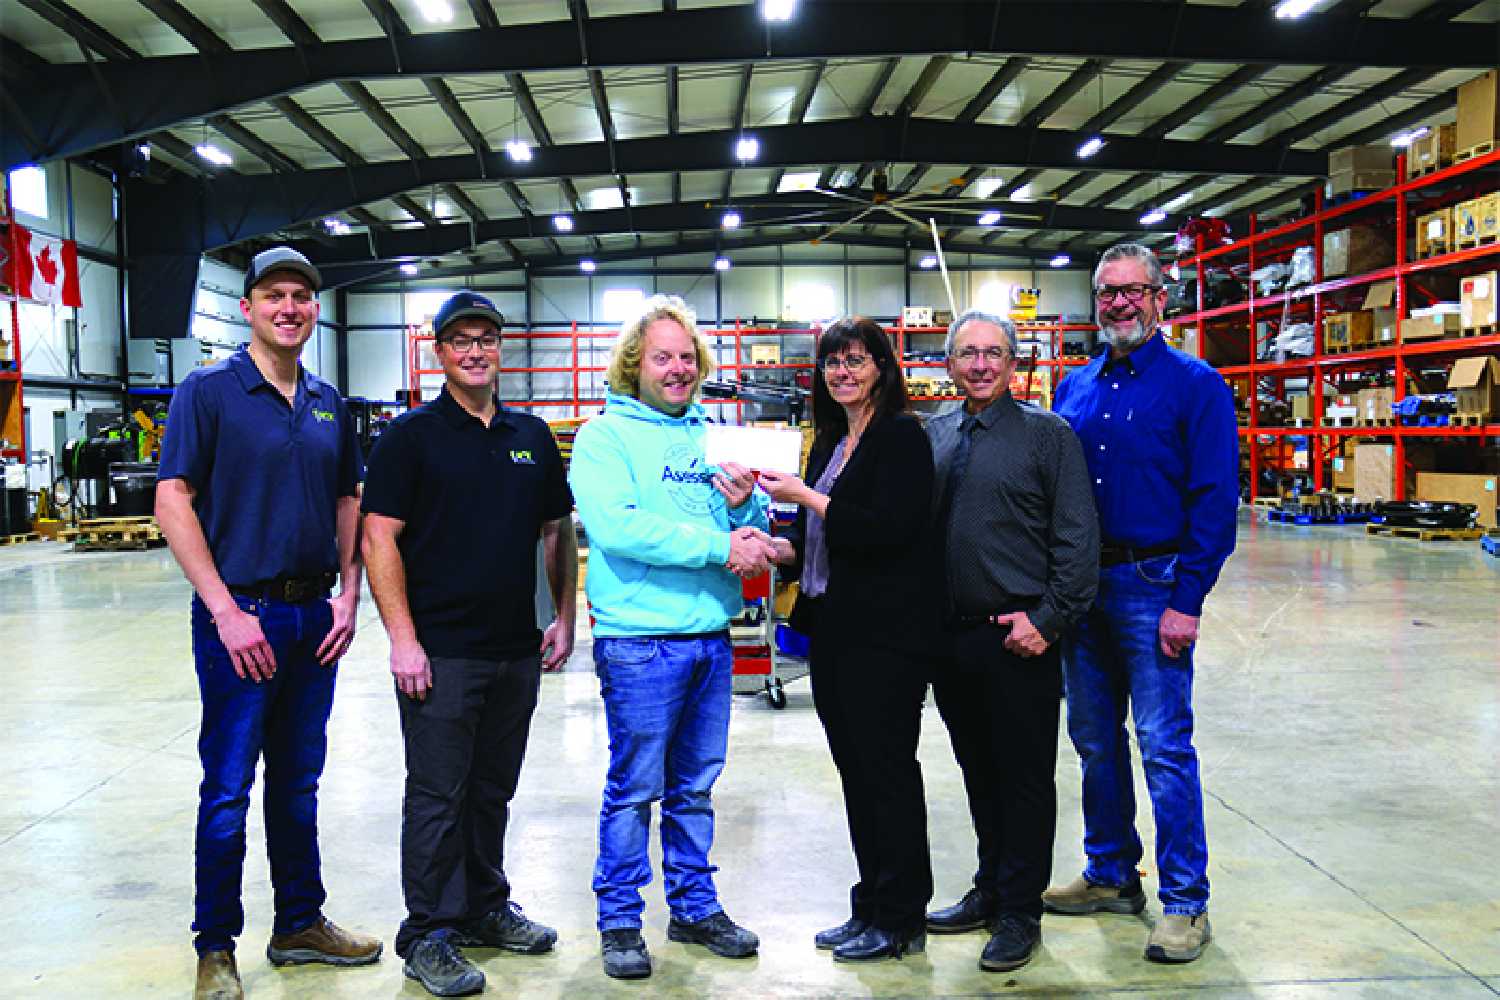 IJACK presented a cheque for $500,000 recently for the Moosomin Airport Expansion project. From left are Graham Mannle, Richie Barry, and Dan McCarthy of IJACK, and Kendra Lawrence, Jeff St. Onge and Dr. Van of the Airport Committee.